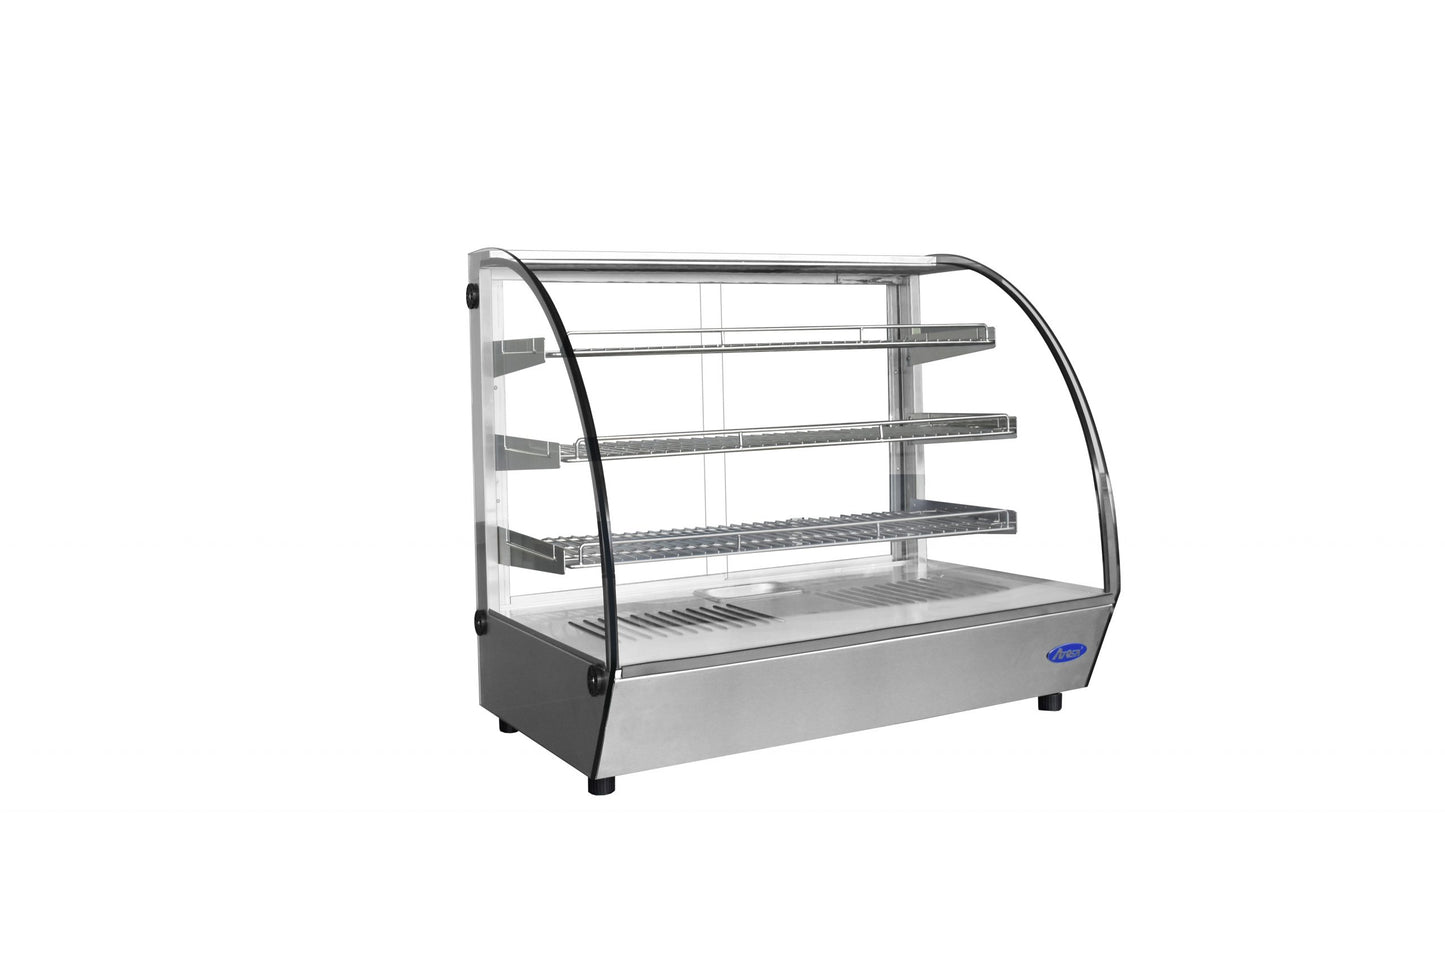 Atosa CHDC-44 Countertop Heated Display Case - Curved, 4.4 Cu Ft w/ 3 SS Shelves w/ 2 Rear Sliding Glass Doors Dimensions: 27-1/2 W * 22-7/8 D * 26-3/4 H